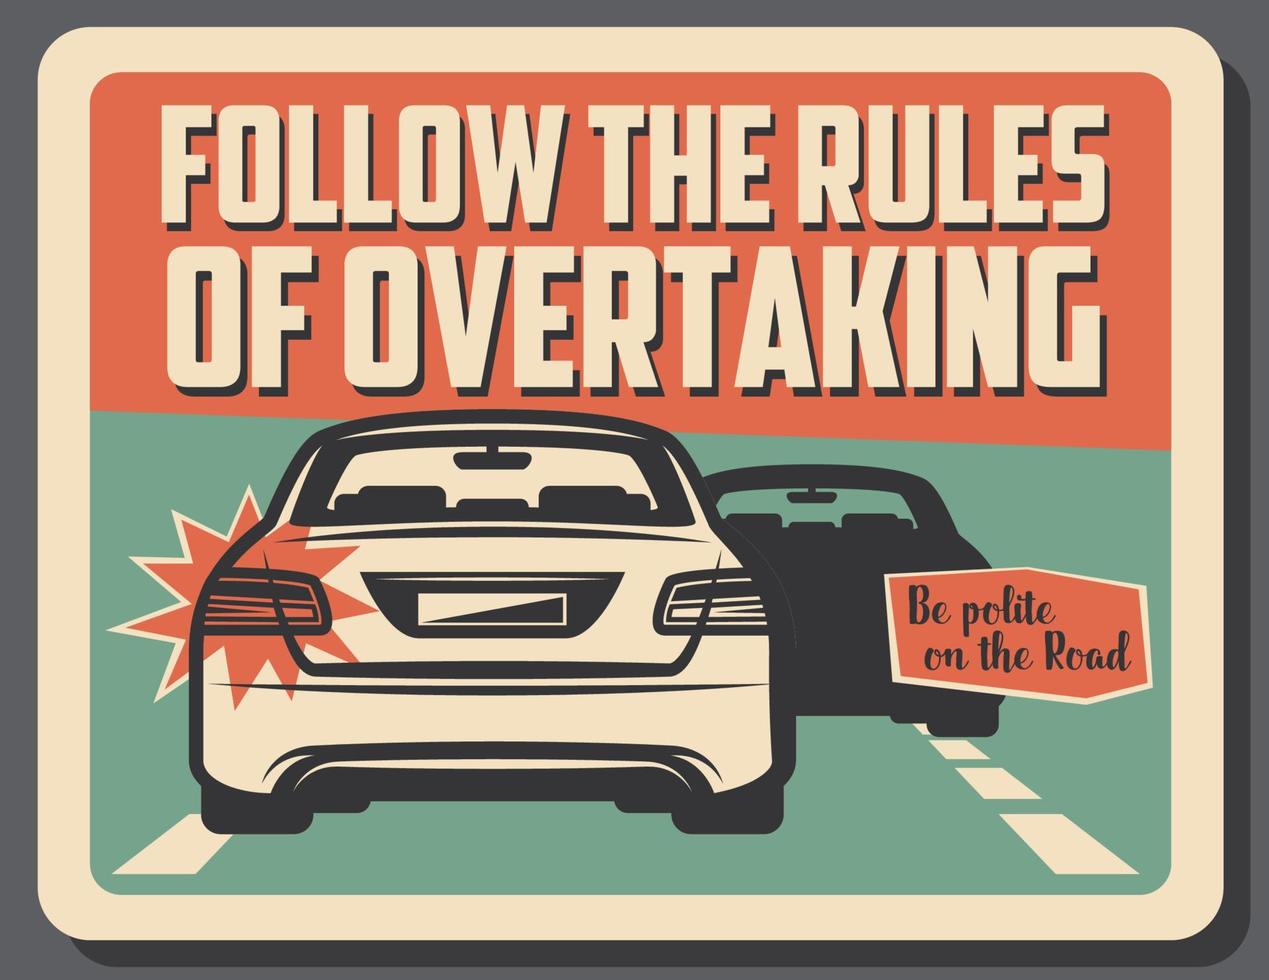 Caution of overtaking on road, driving rules vector